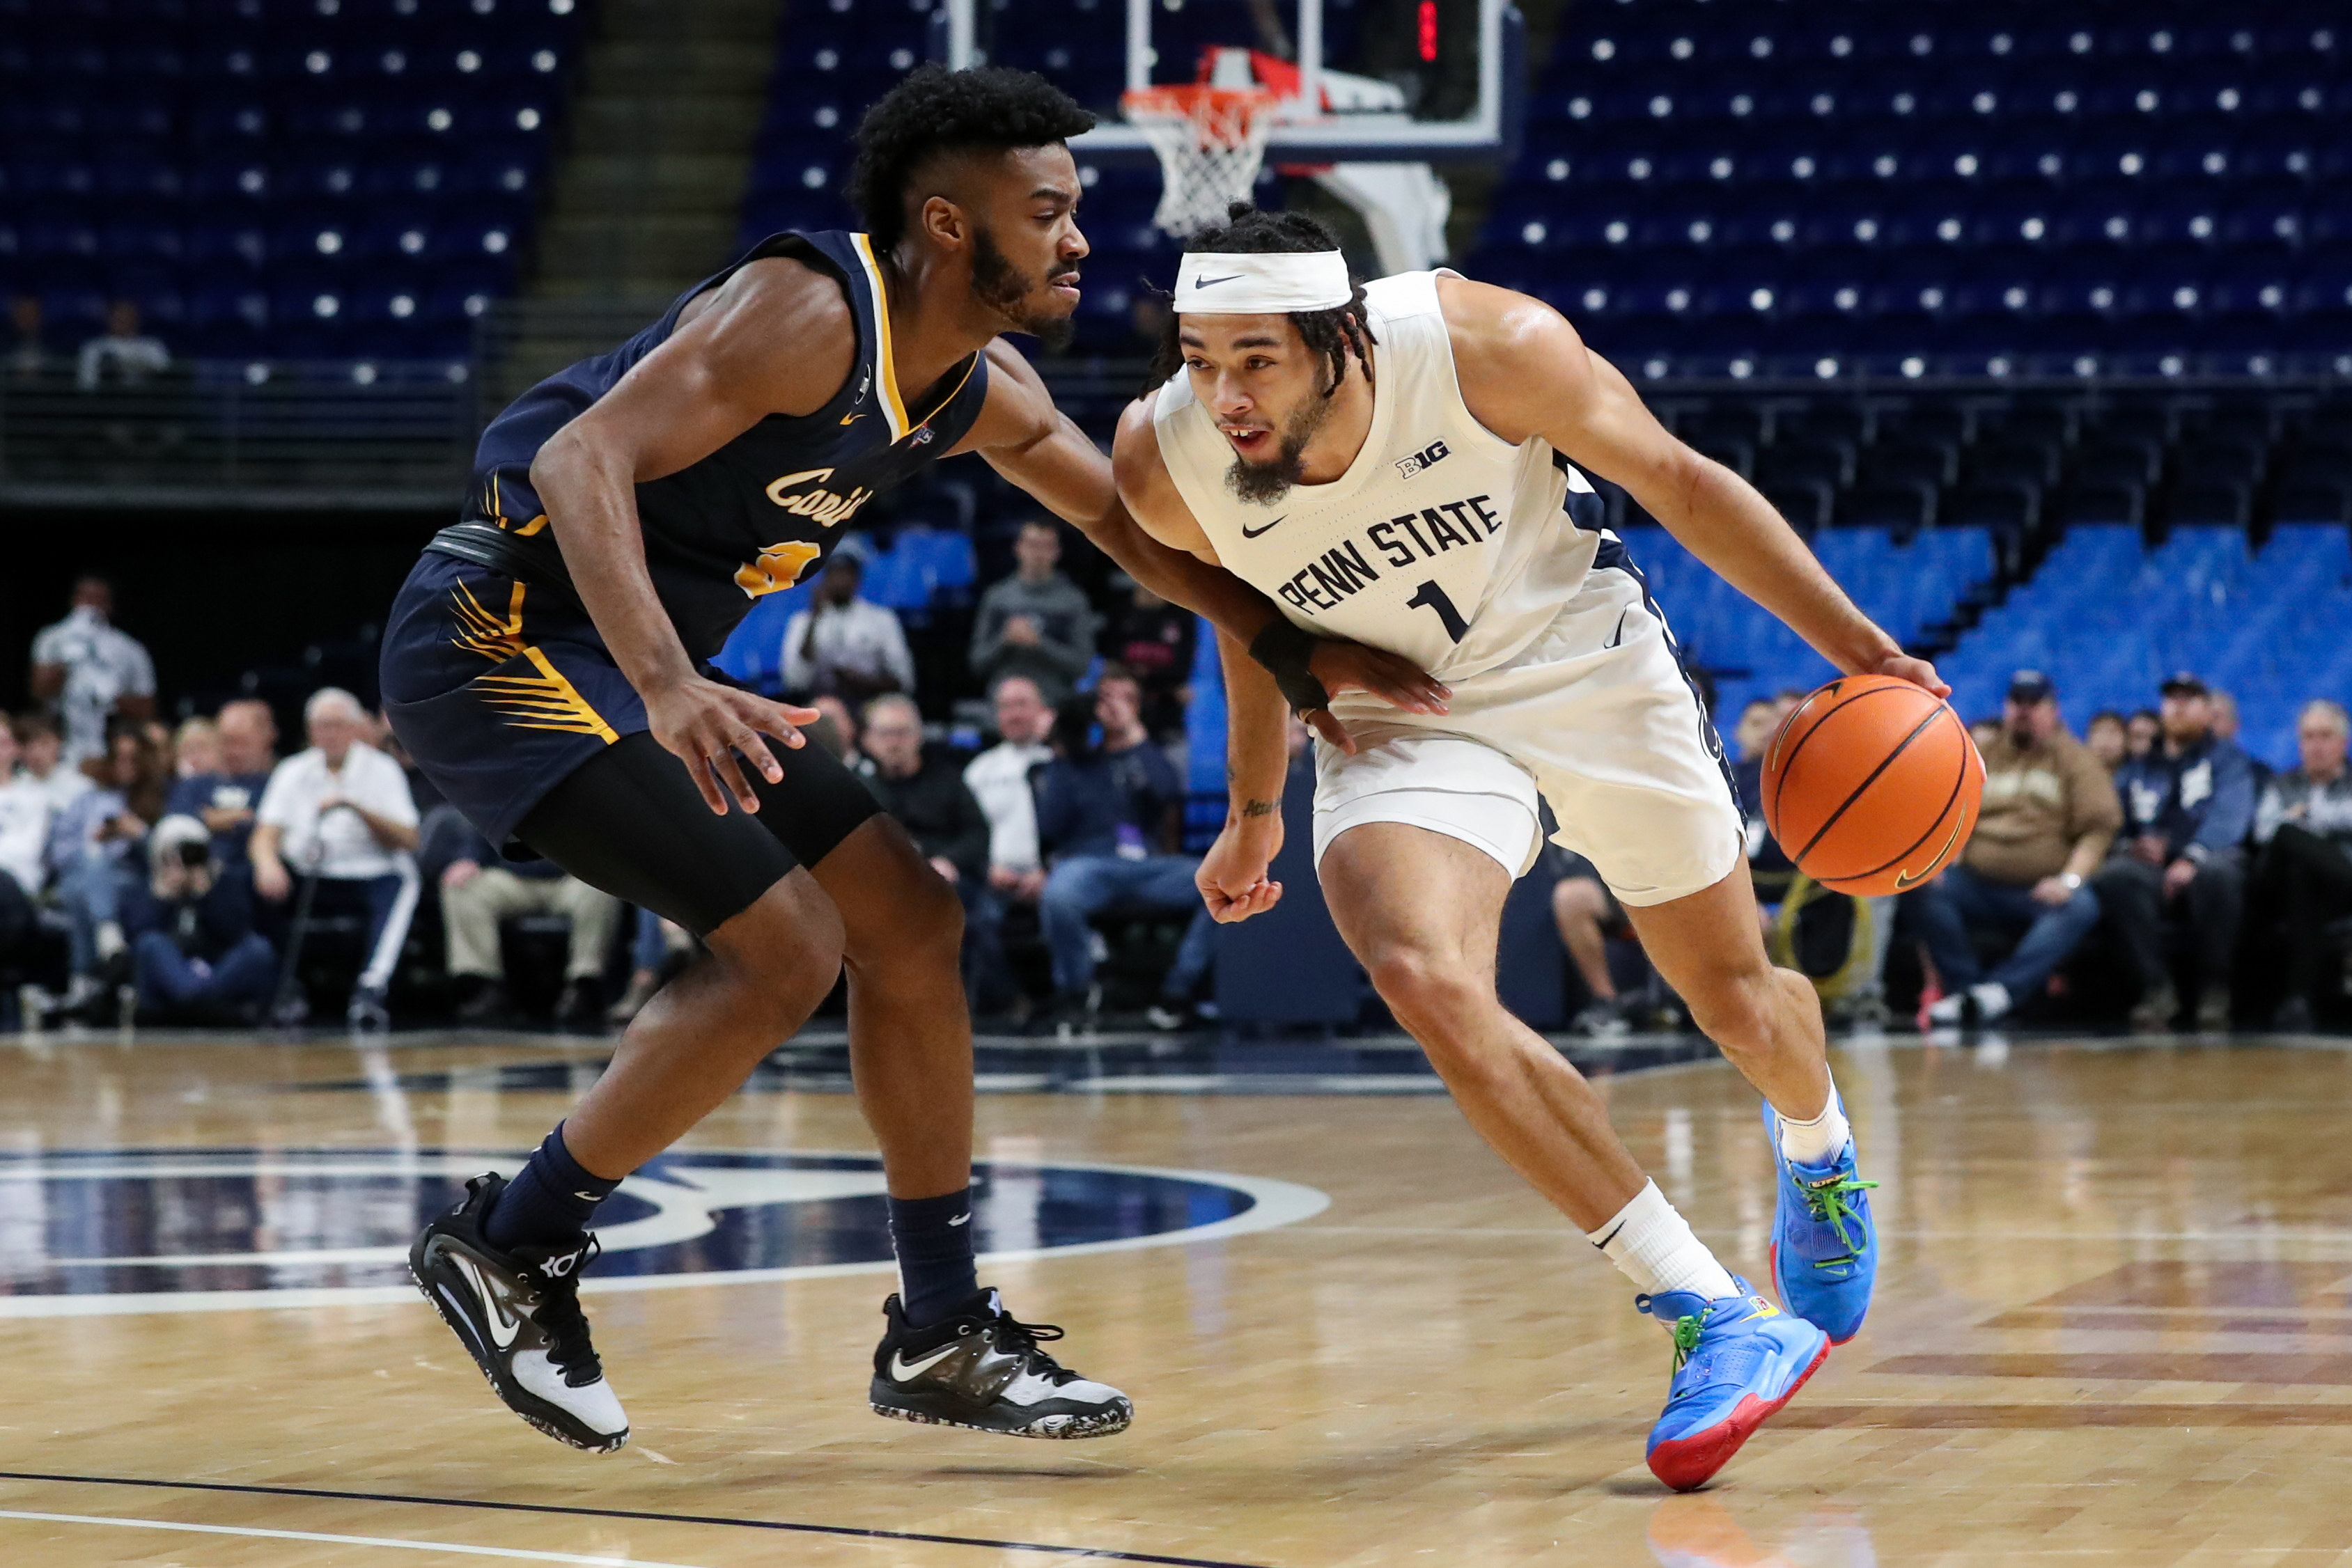 Dec 18, 2022; University Park, Pennsylvania, USA; Penn State Nittany Lions guard/forward Seth Lundy (1) dribbles the ball around the outside of Canisius Golden Griffins guard Jordan Henderson (3) during the first half at Bryce Jordan Center.